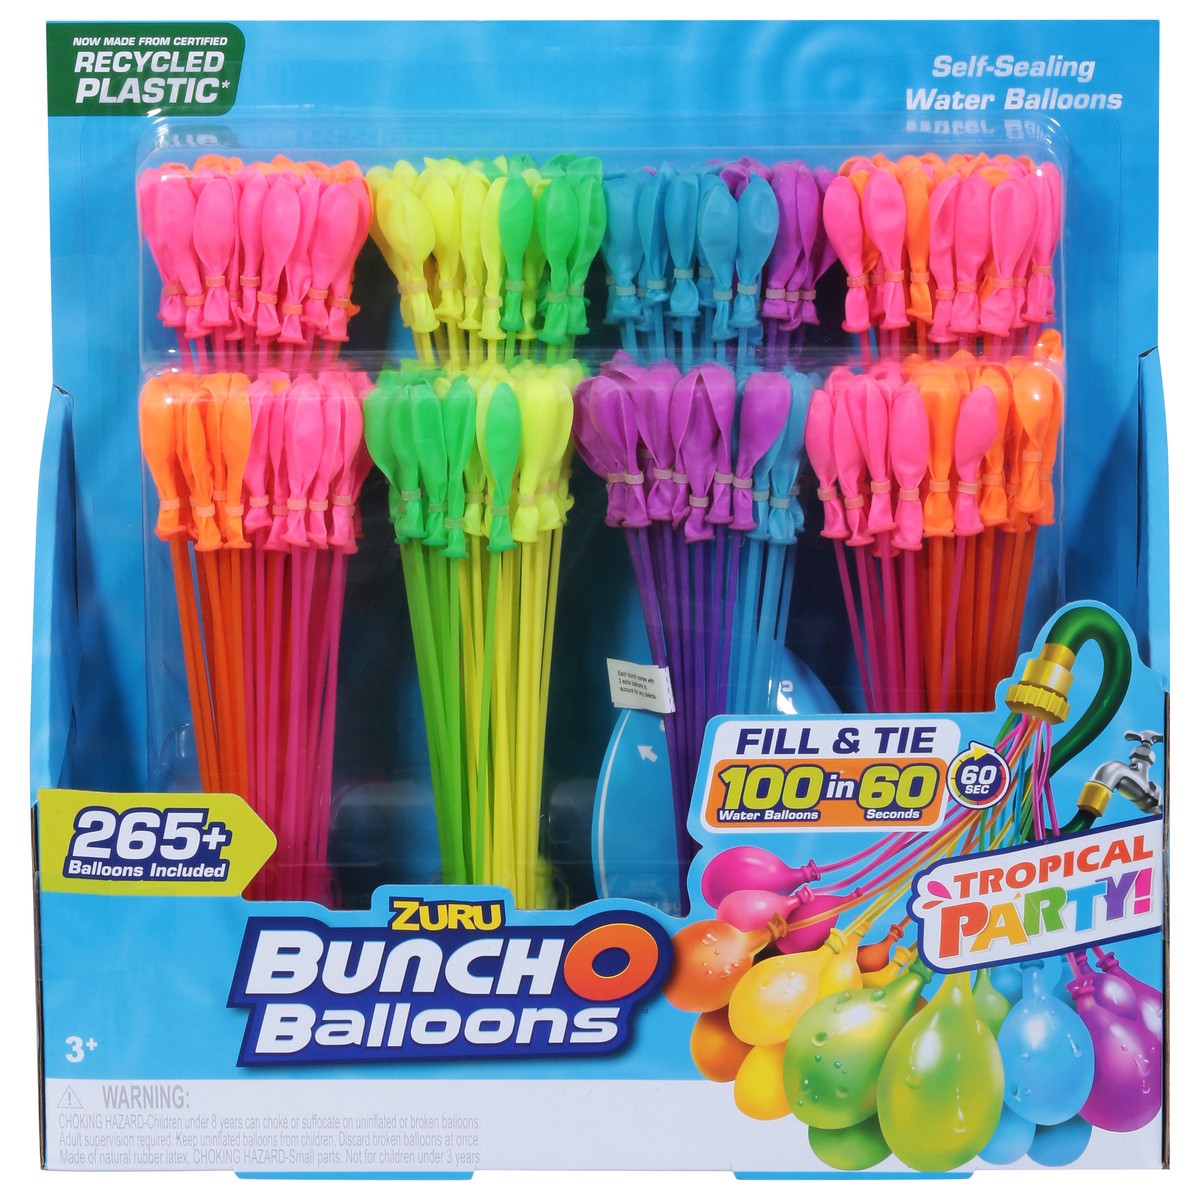 slide 1 of 1, Bunch O Balloons Tropical Party 265+ Rapid-Filling Self-Sealing Water Balloons by ZURU, 8 ct